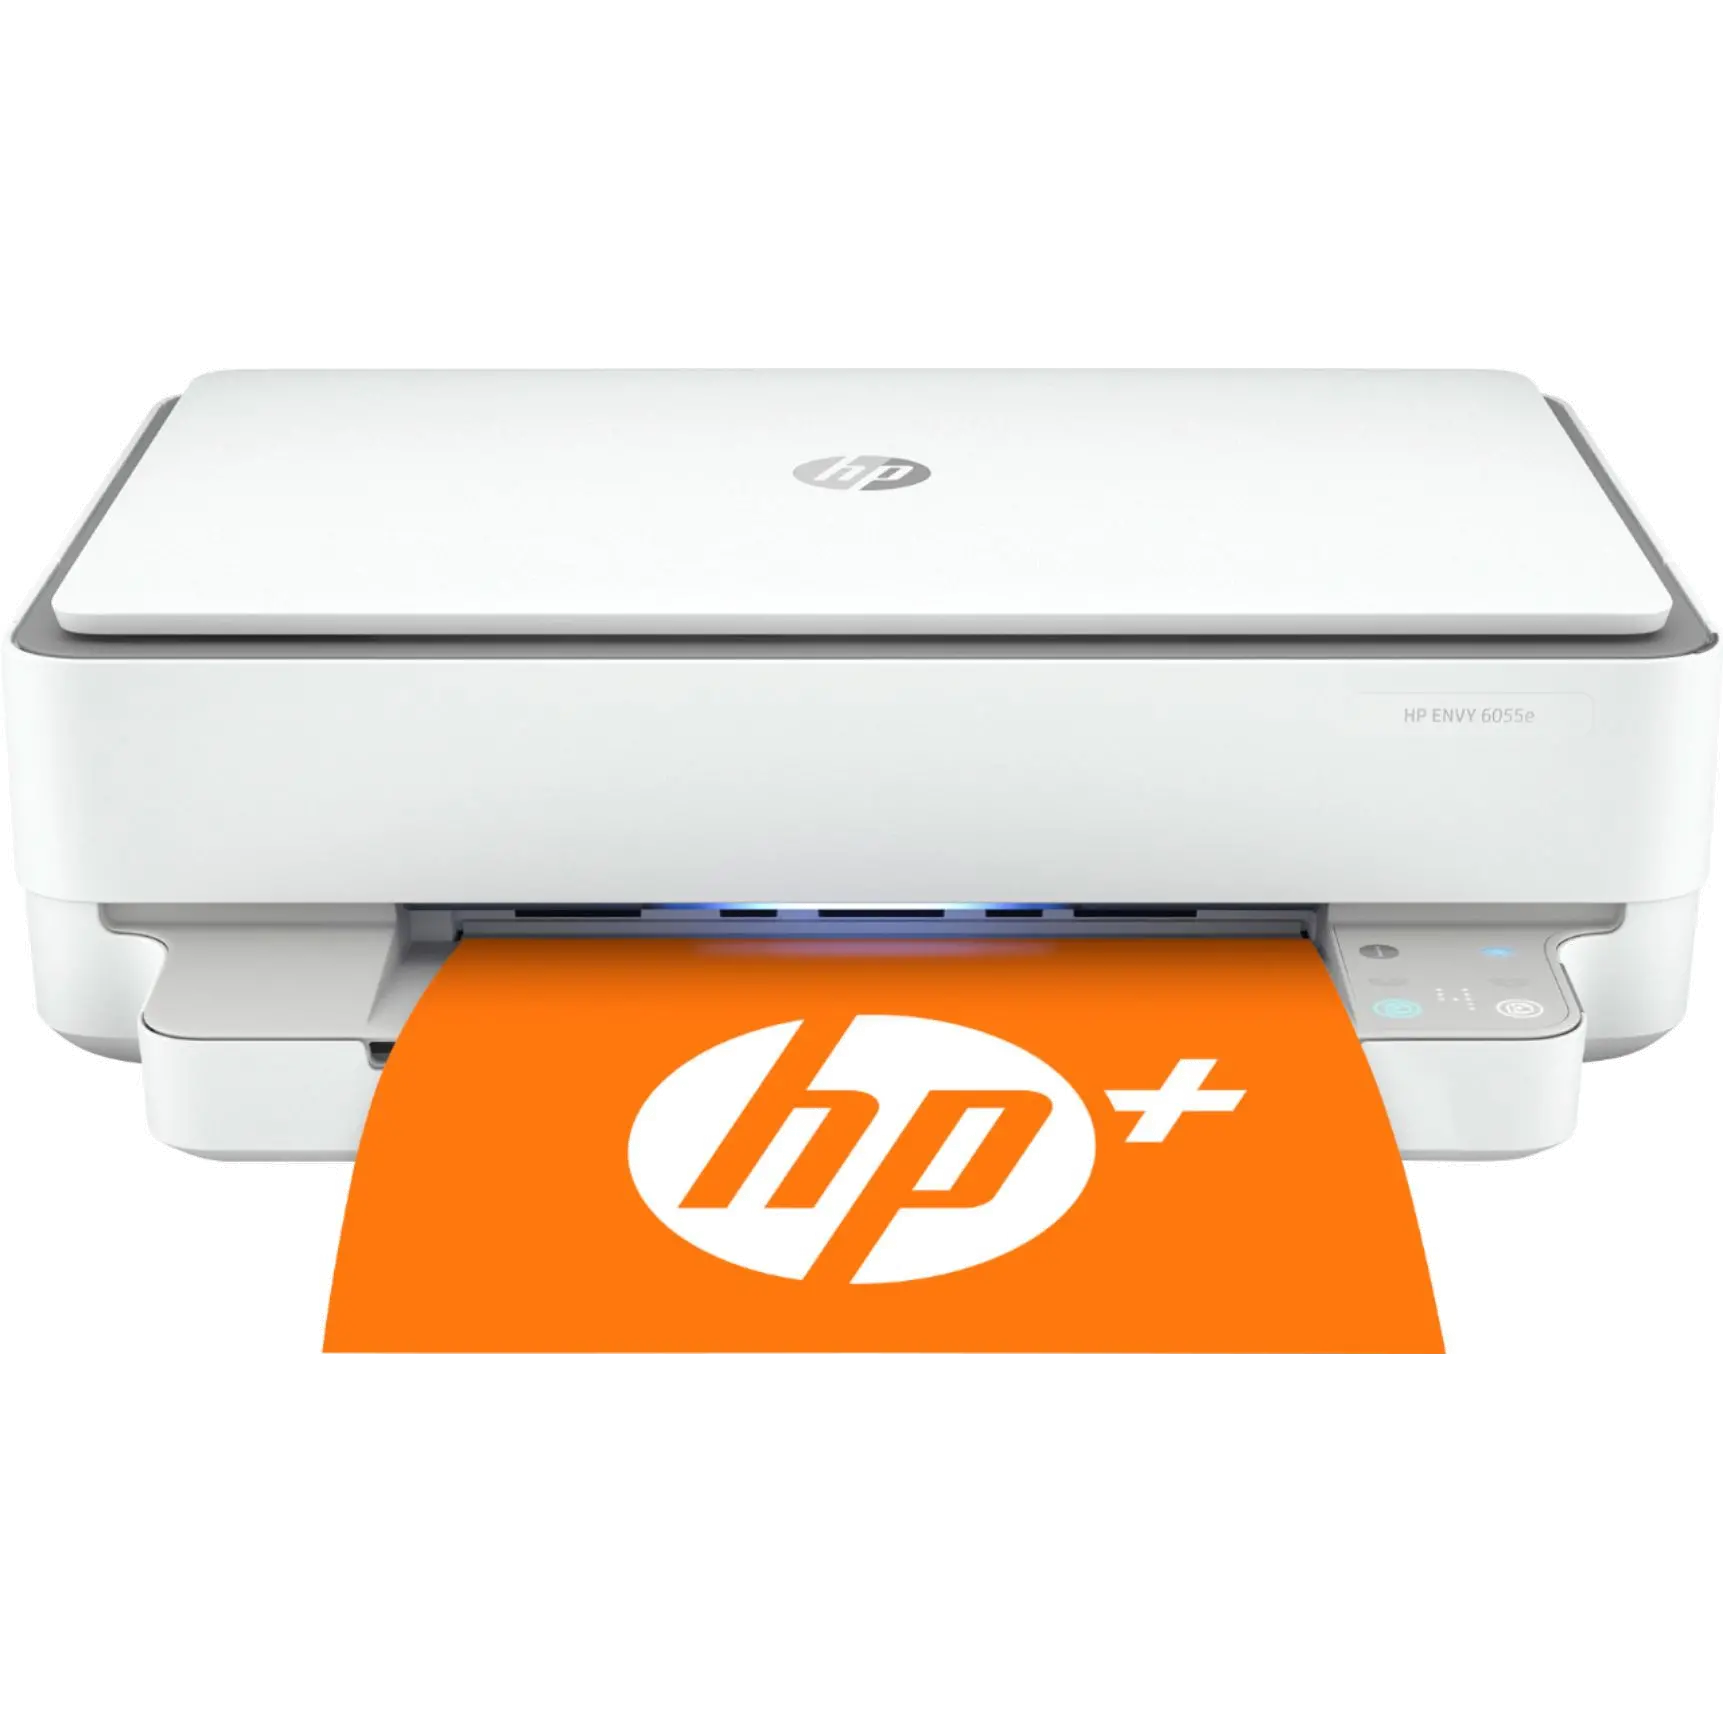 Hp Envy 6055e All In One Wireless Inkjet Printer Rc Willey 0175